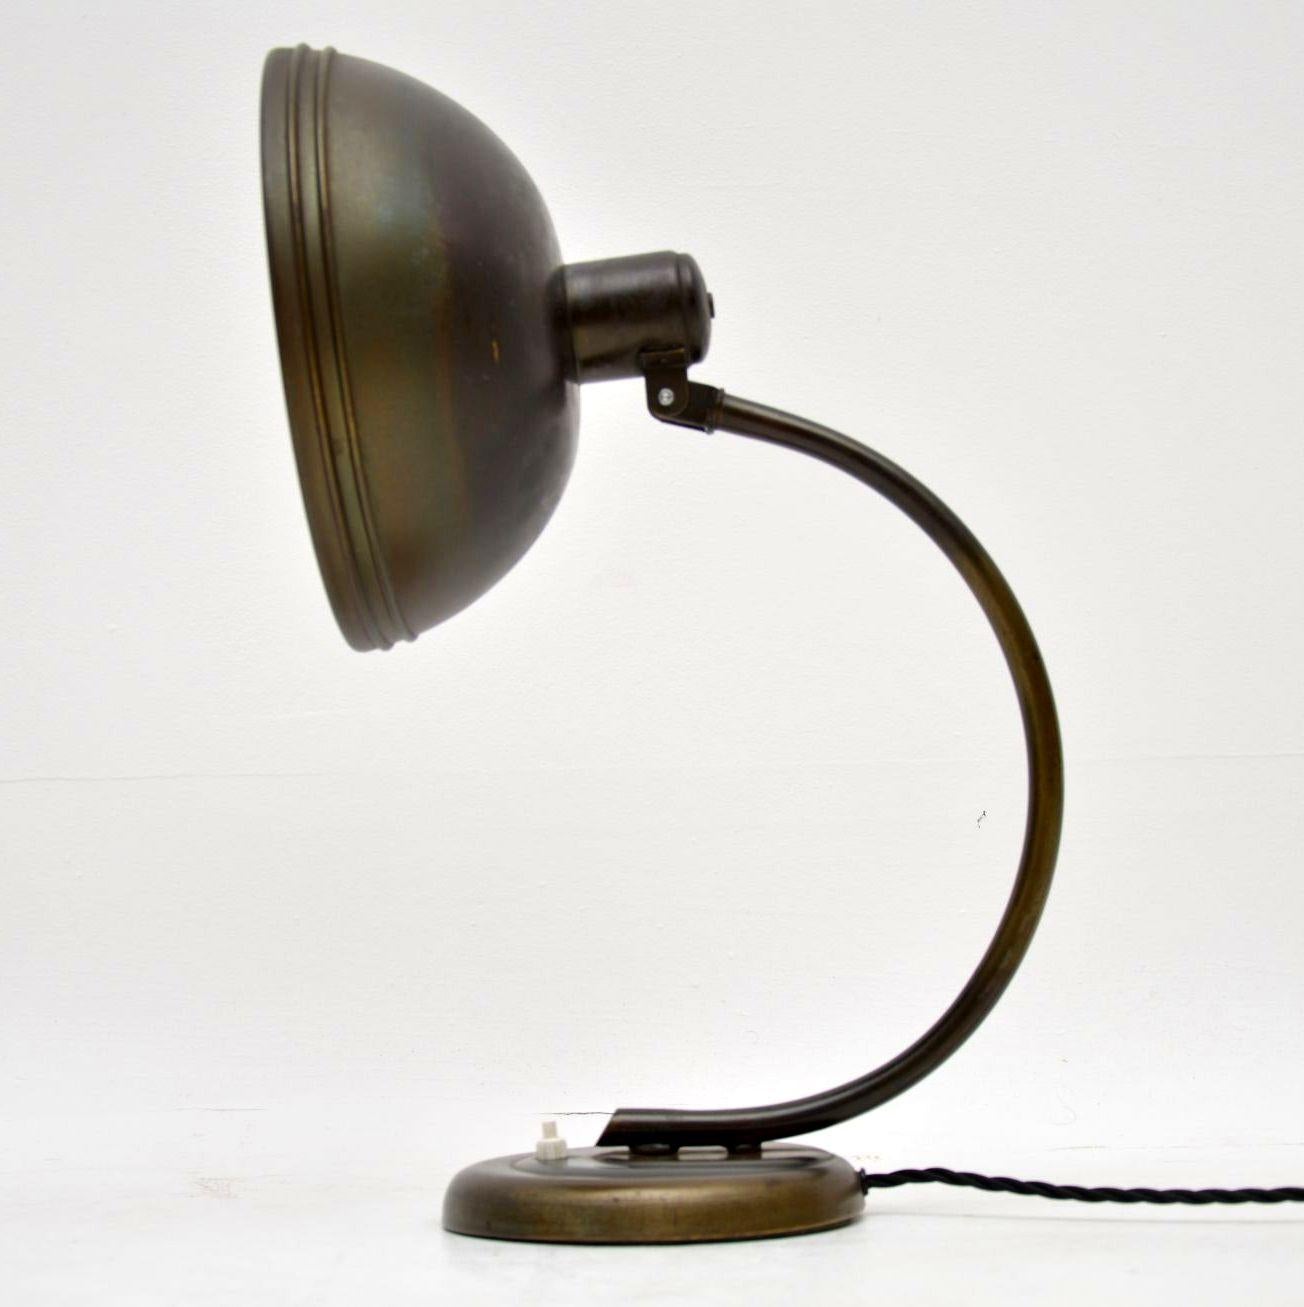 A beautiful early midcentury table lamp darting from circa 1940s-1950s, this is very much in the Bauhaus style, it originates from central Europe. The condition is lovely; it’s made from metal that has acquired a gorgeous patina. We have had this